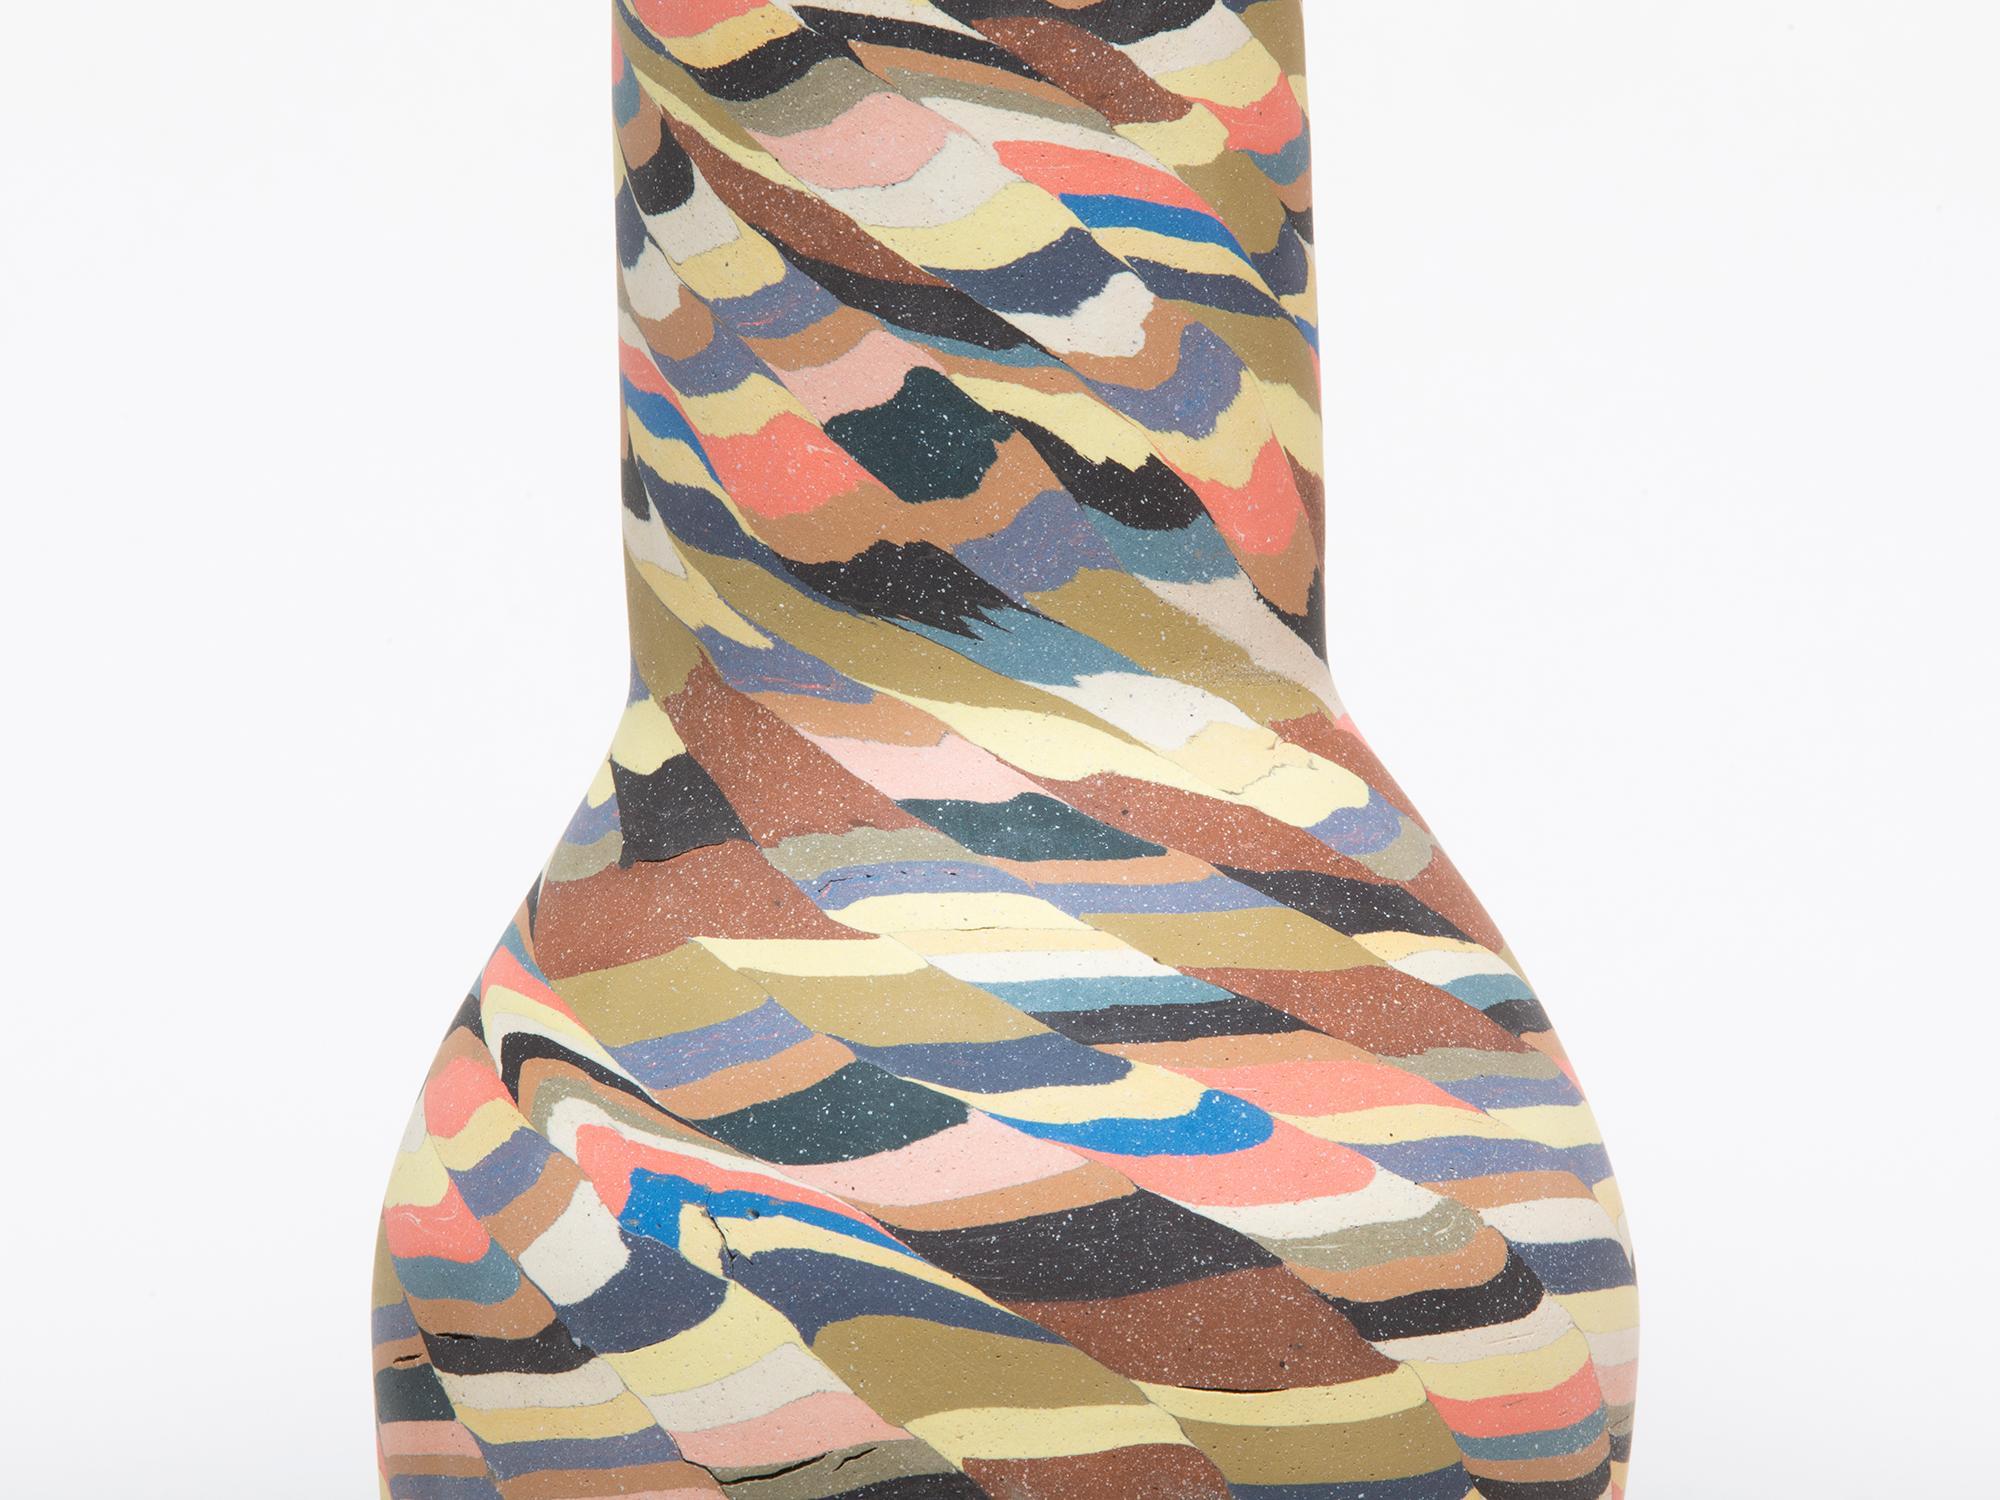 American Colorful Ceramic Vase by Cody Hoyt